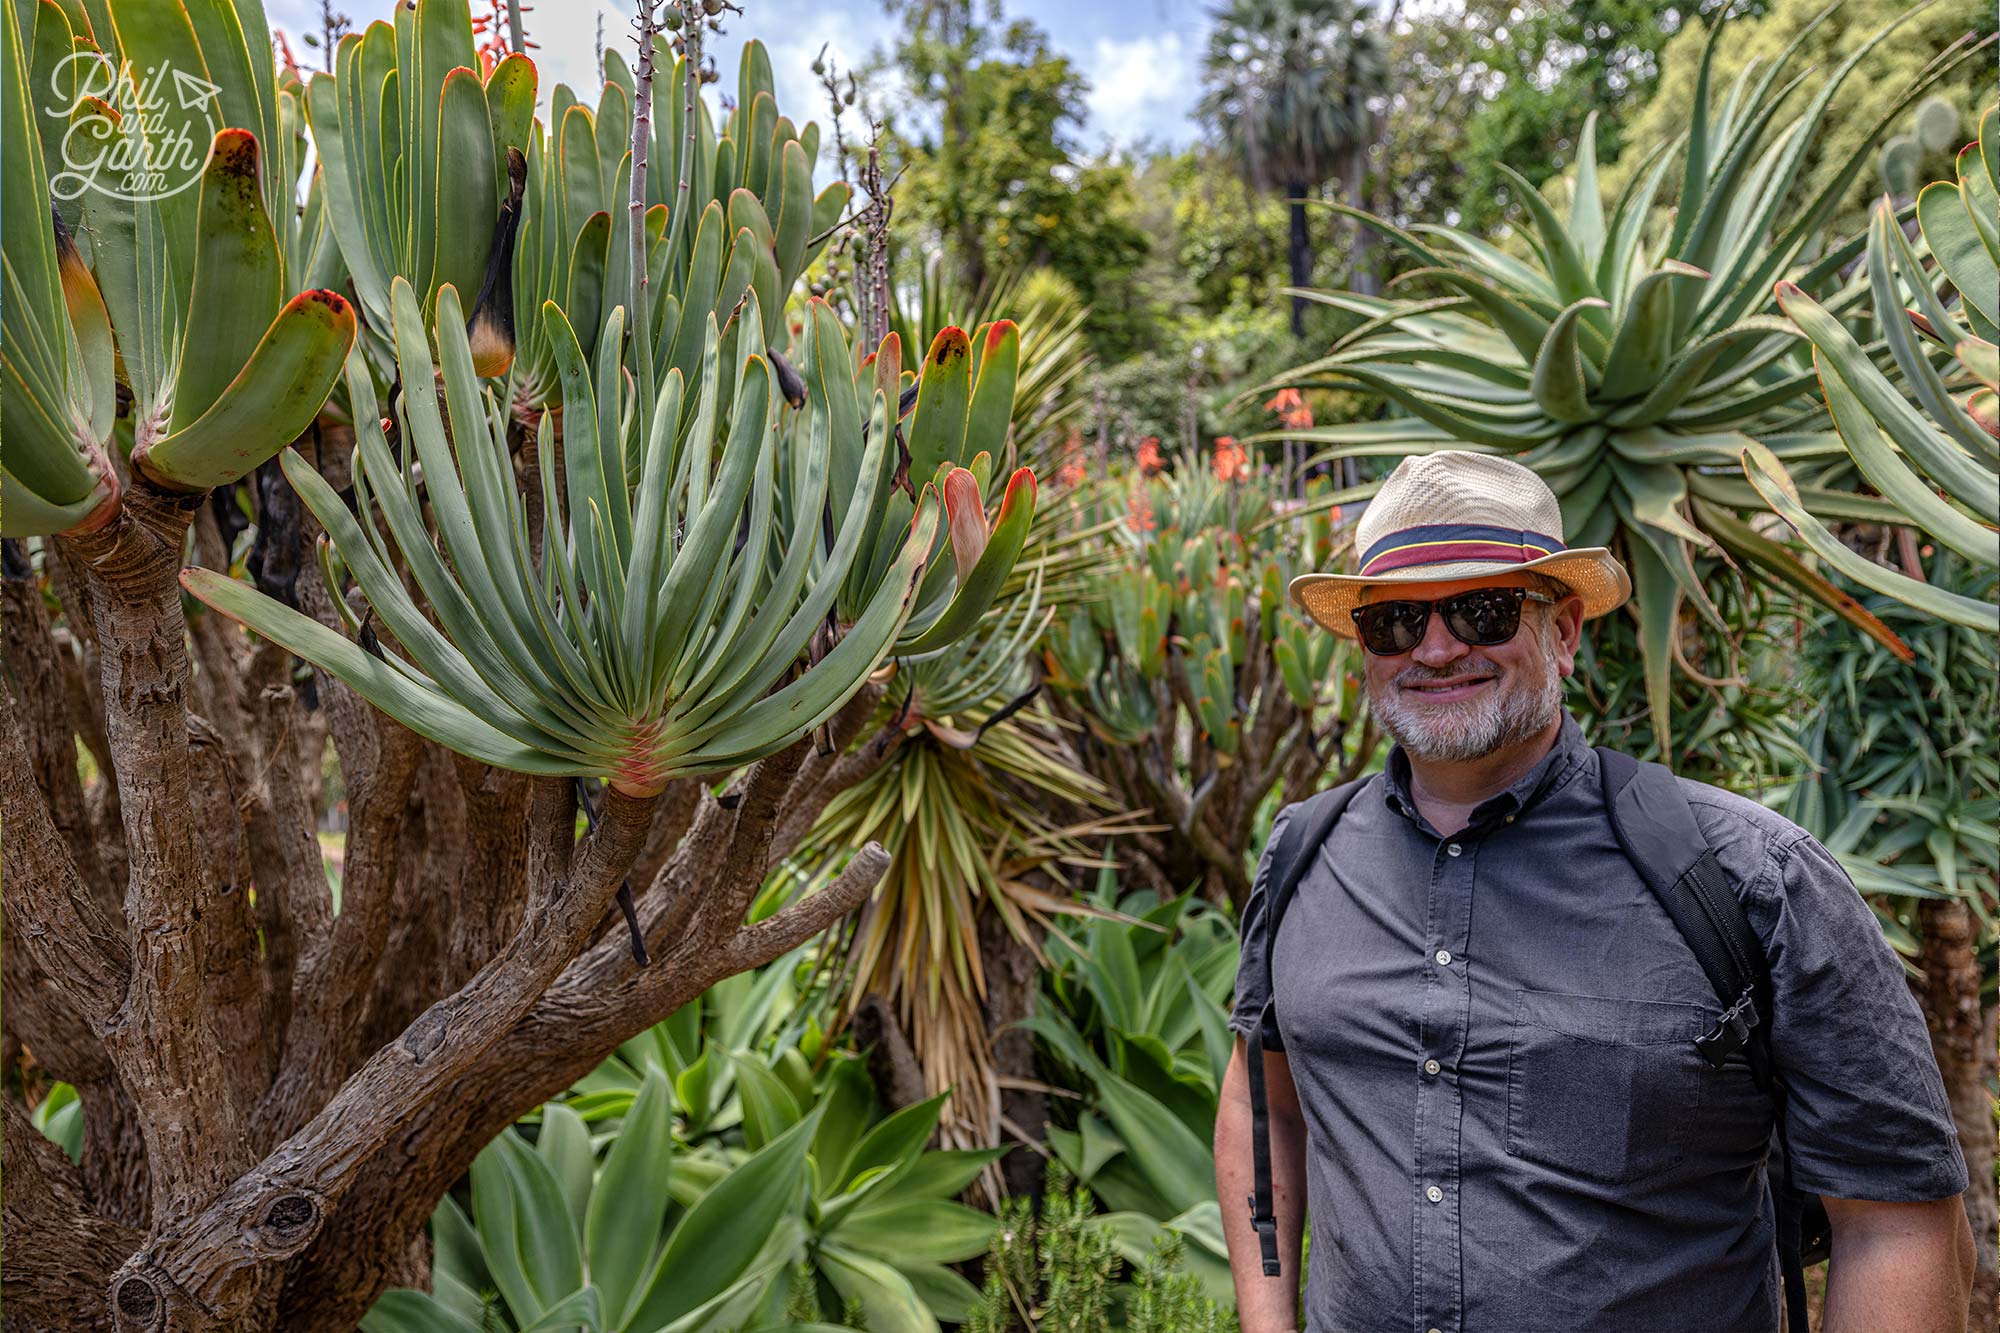 Madeira's Botanical Garden features over 2,000 exotic plants